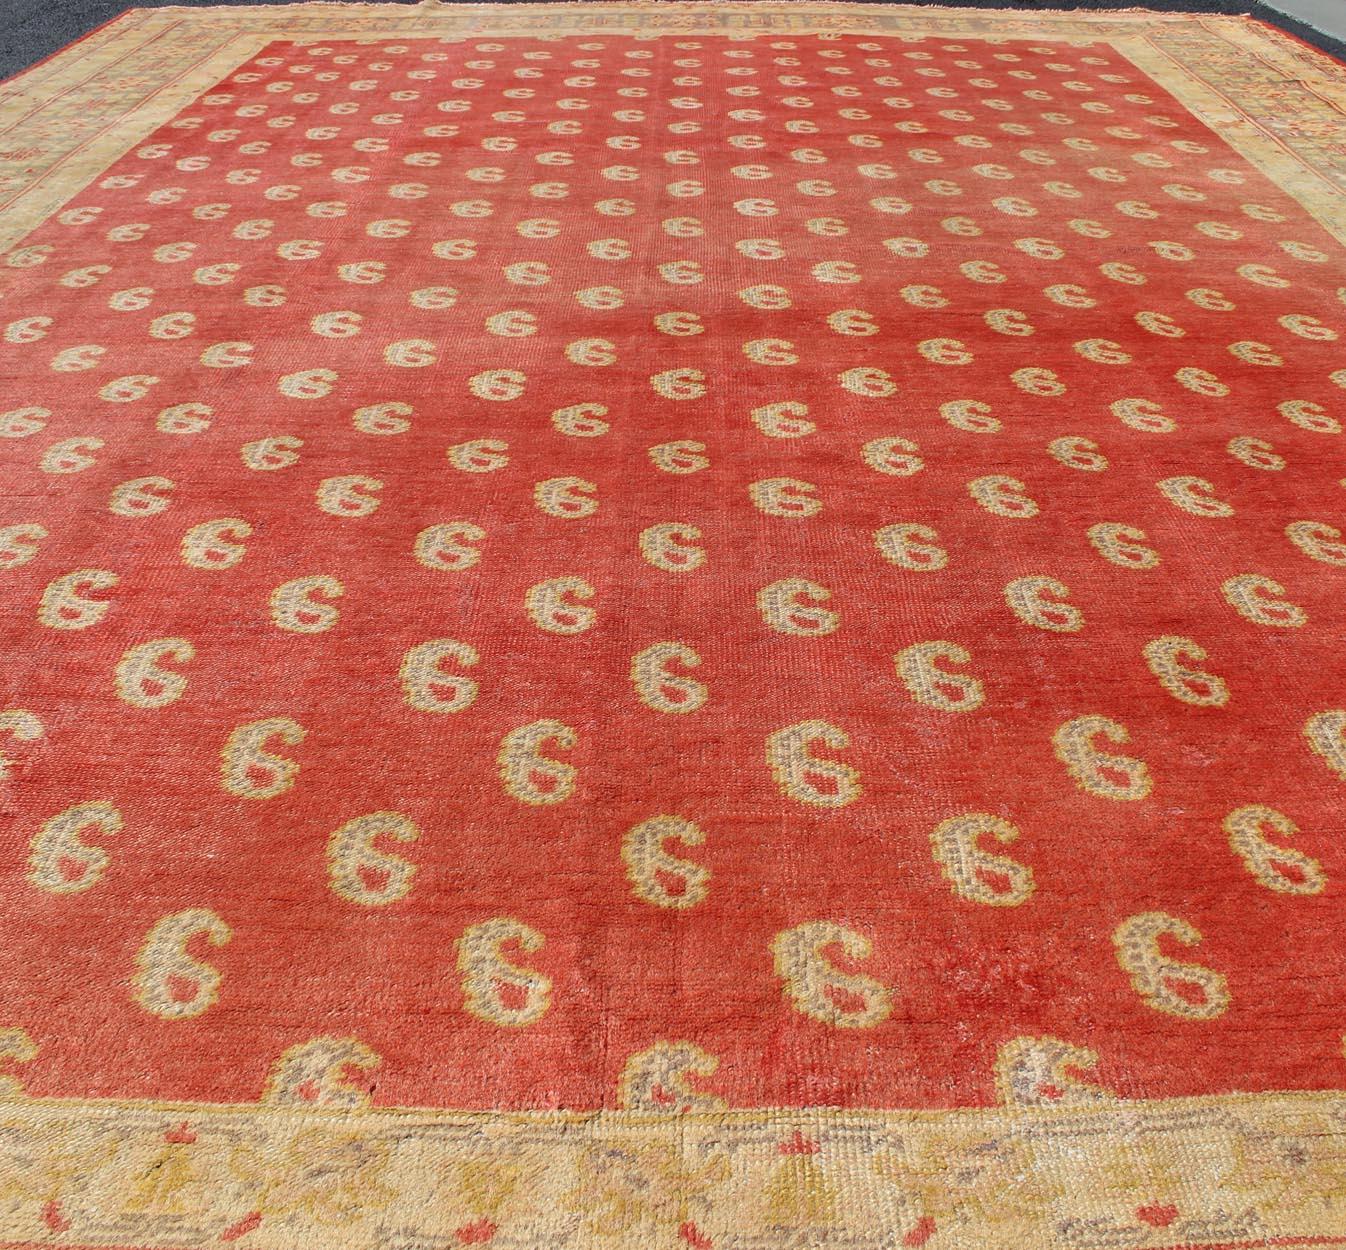 Antique Turkish Oushak Rug with All-Over Design with Red, Light Green and Gold For Sale 5